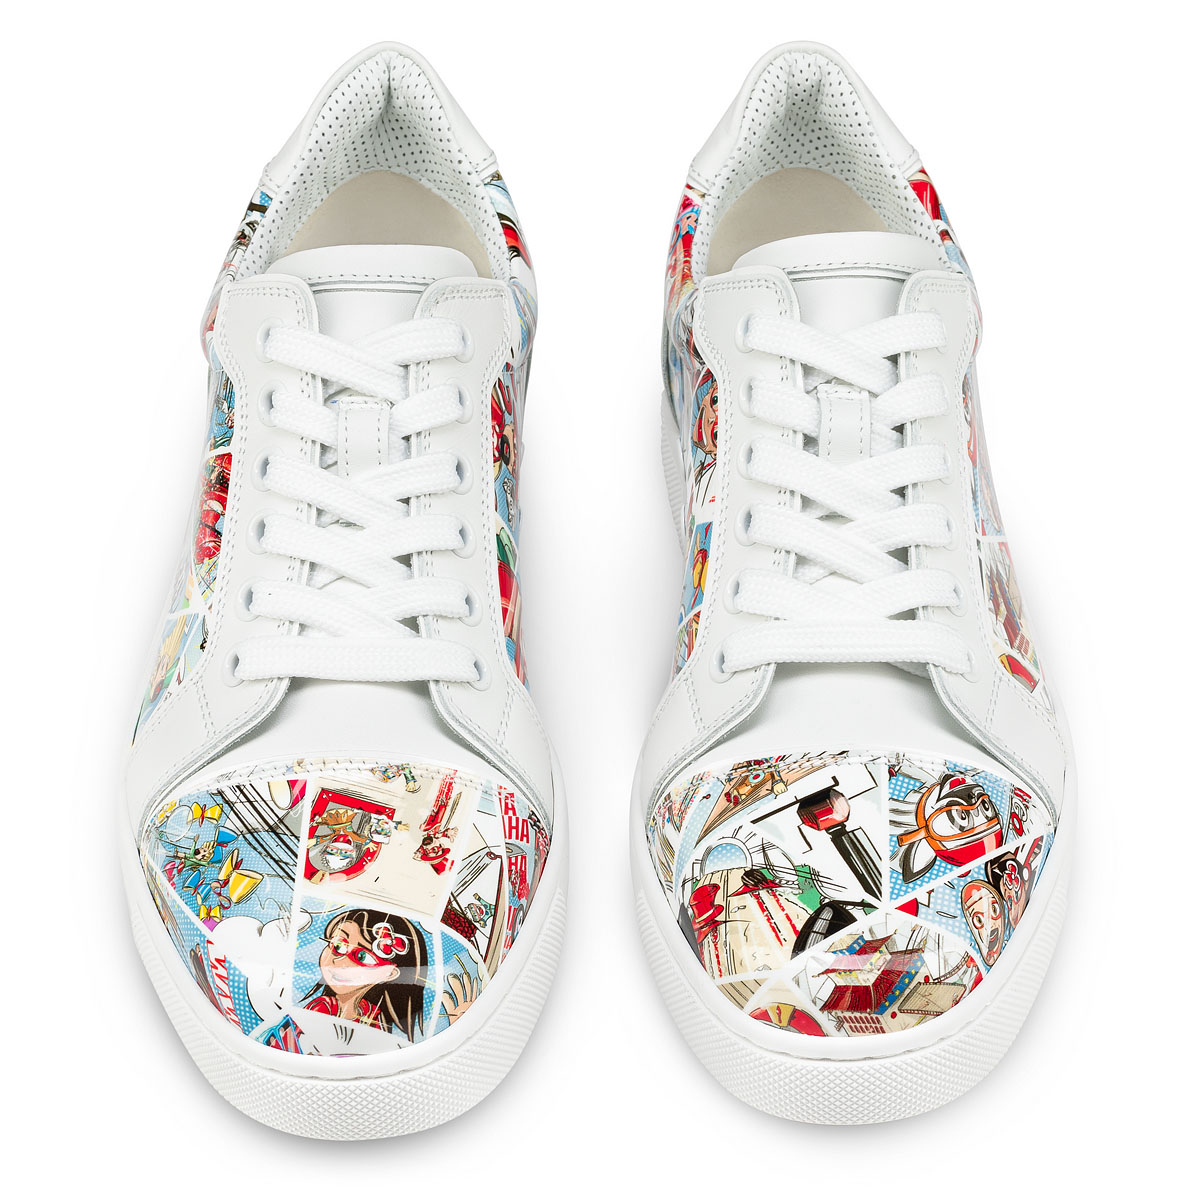 Christian Louboutin FUN LOUIS Comic Patent Leather High Top Sneakers Shoes  $1095